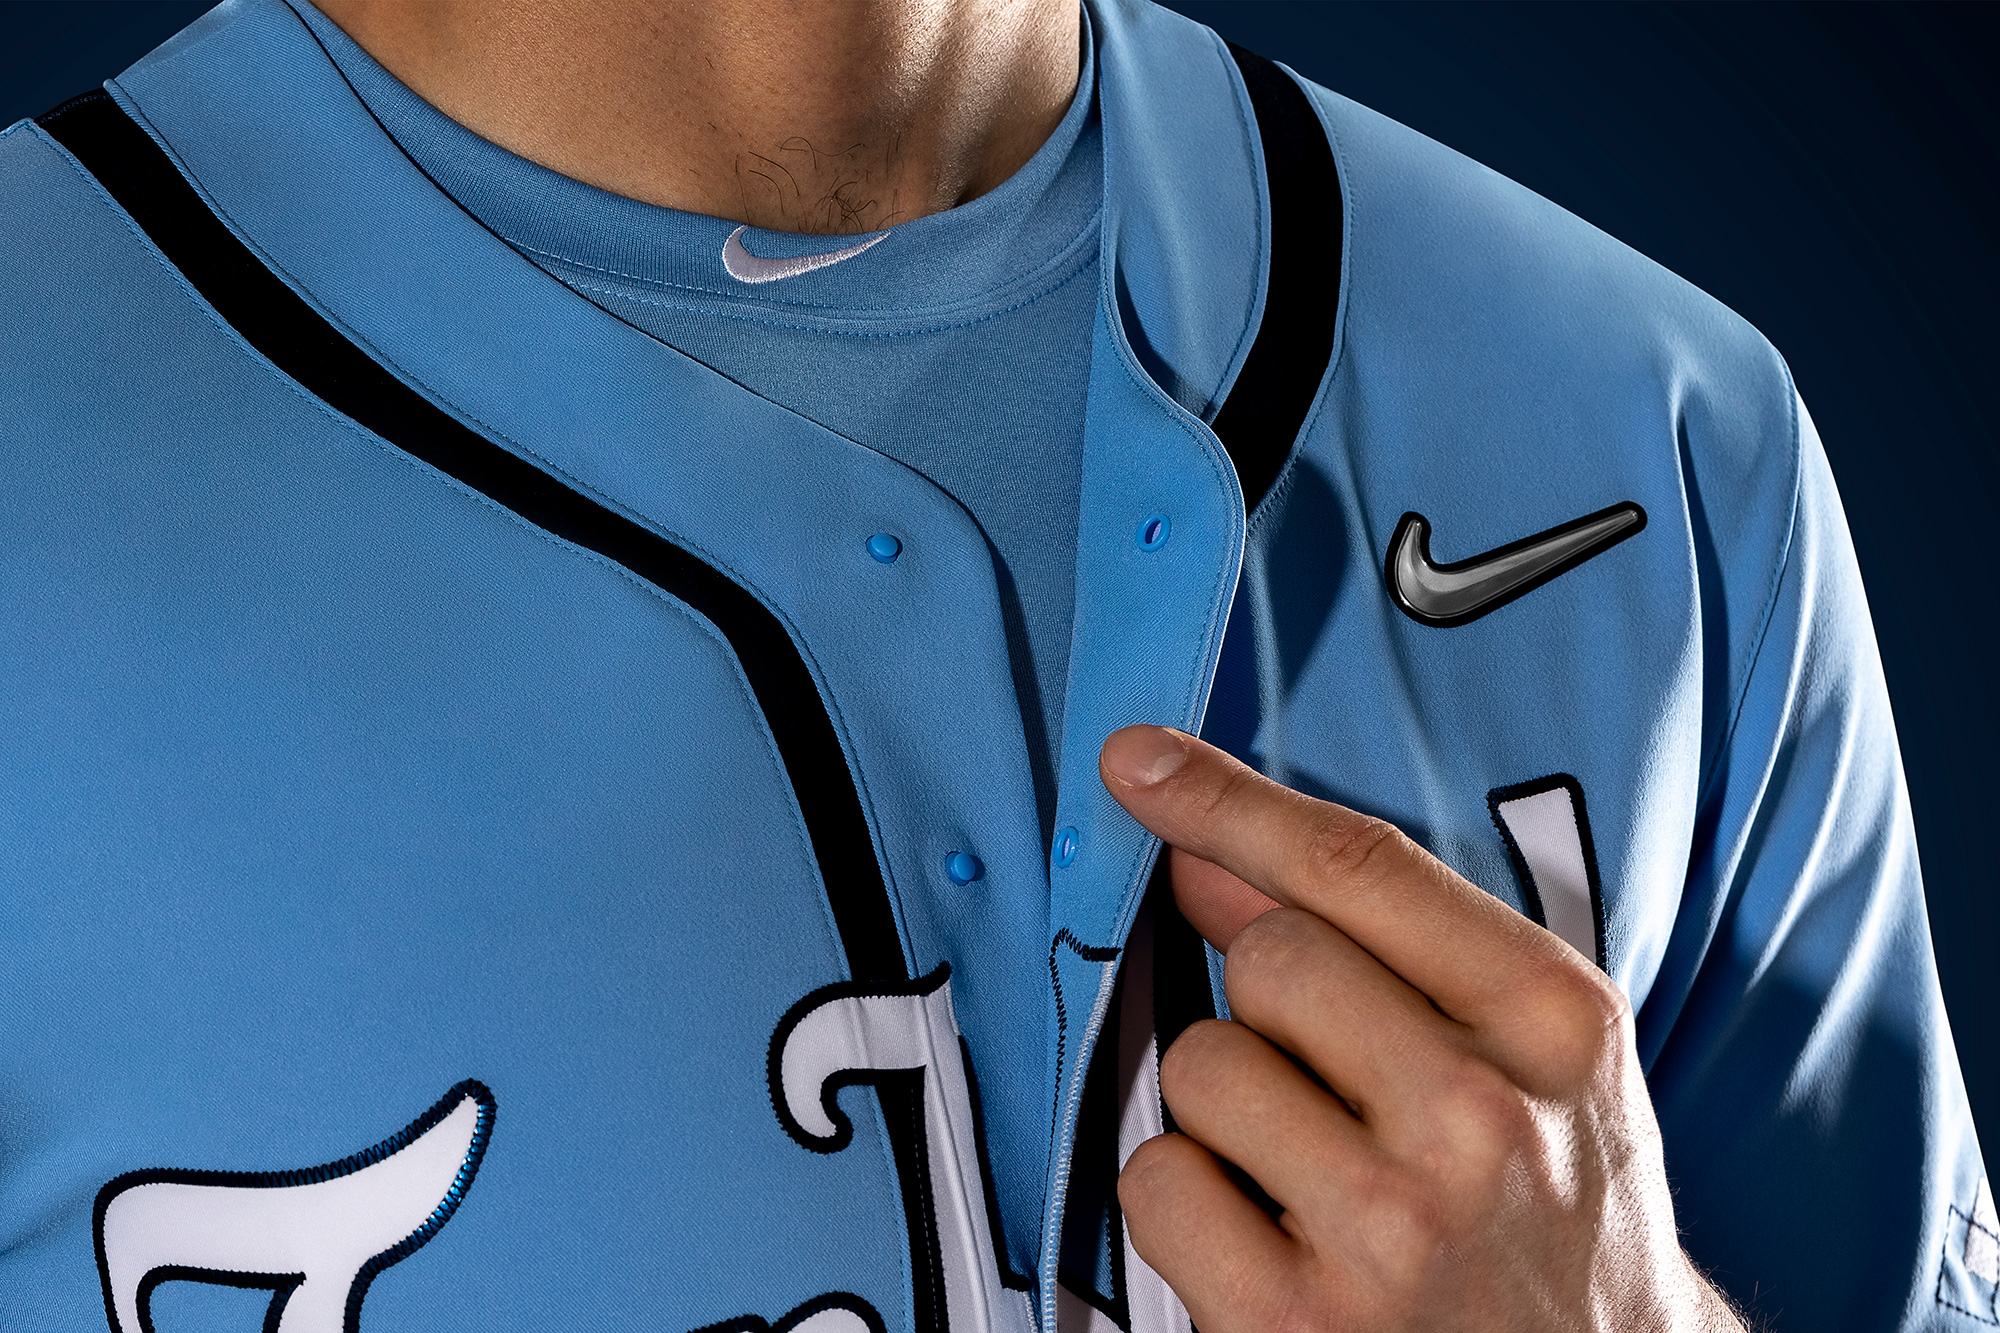 Zach Ancell Photography OR. Los Angeles Fitness NIKE NCAA BASEBALL jersey 